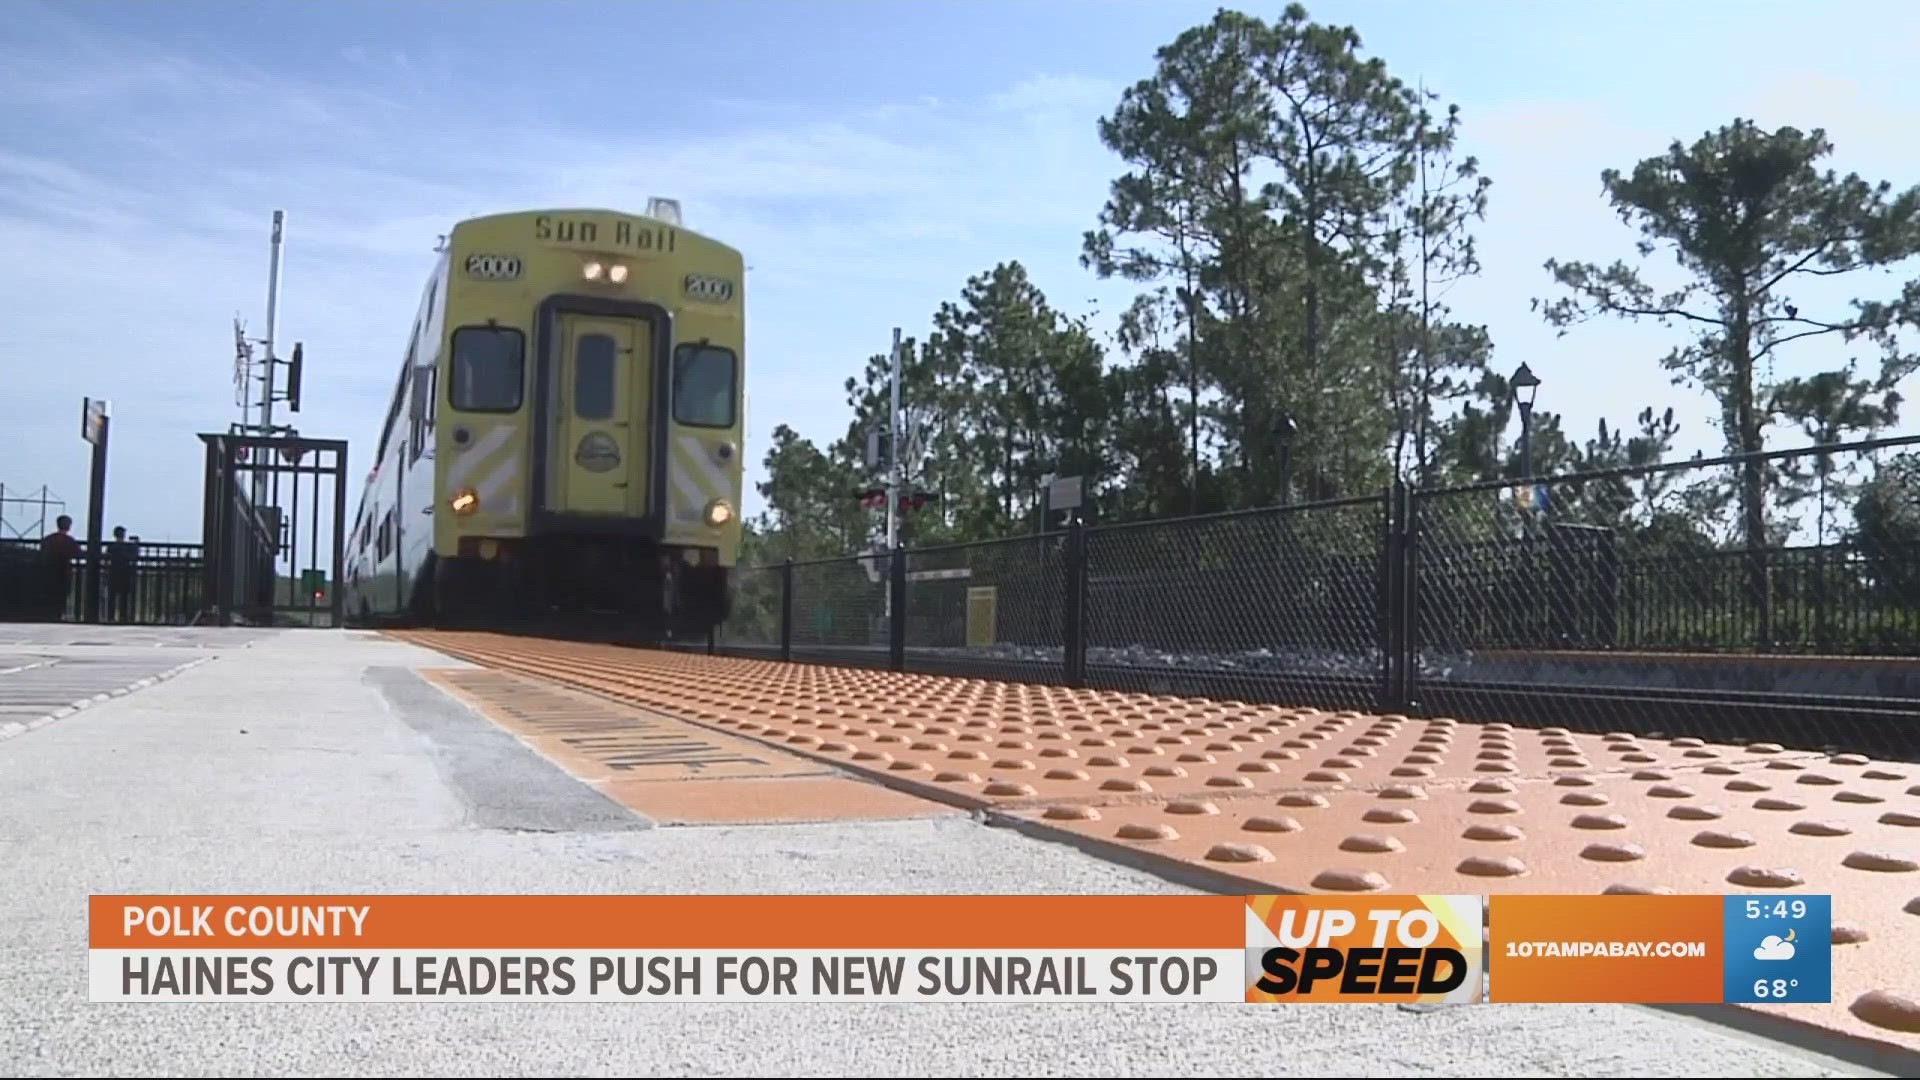 Earlier this year, neighbors in parts of Polk County and Kissimmee took a survey to give their input on where to put a new SunRail train stop.